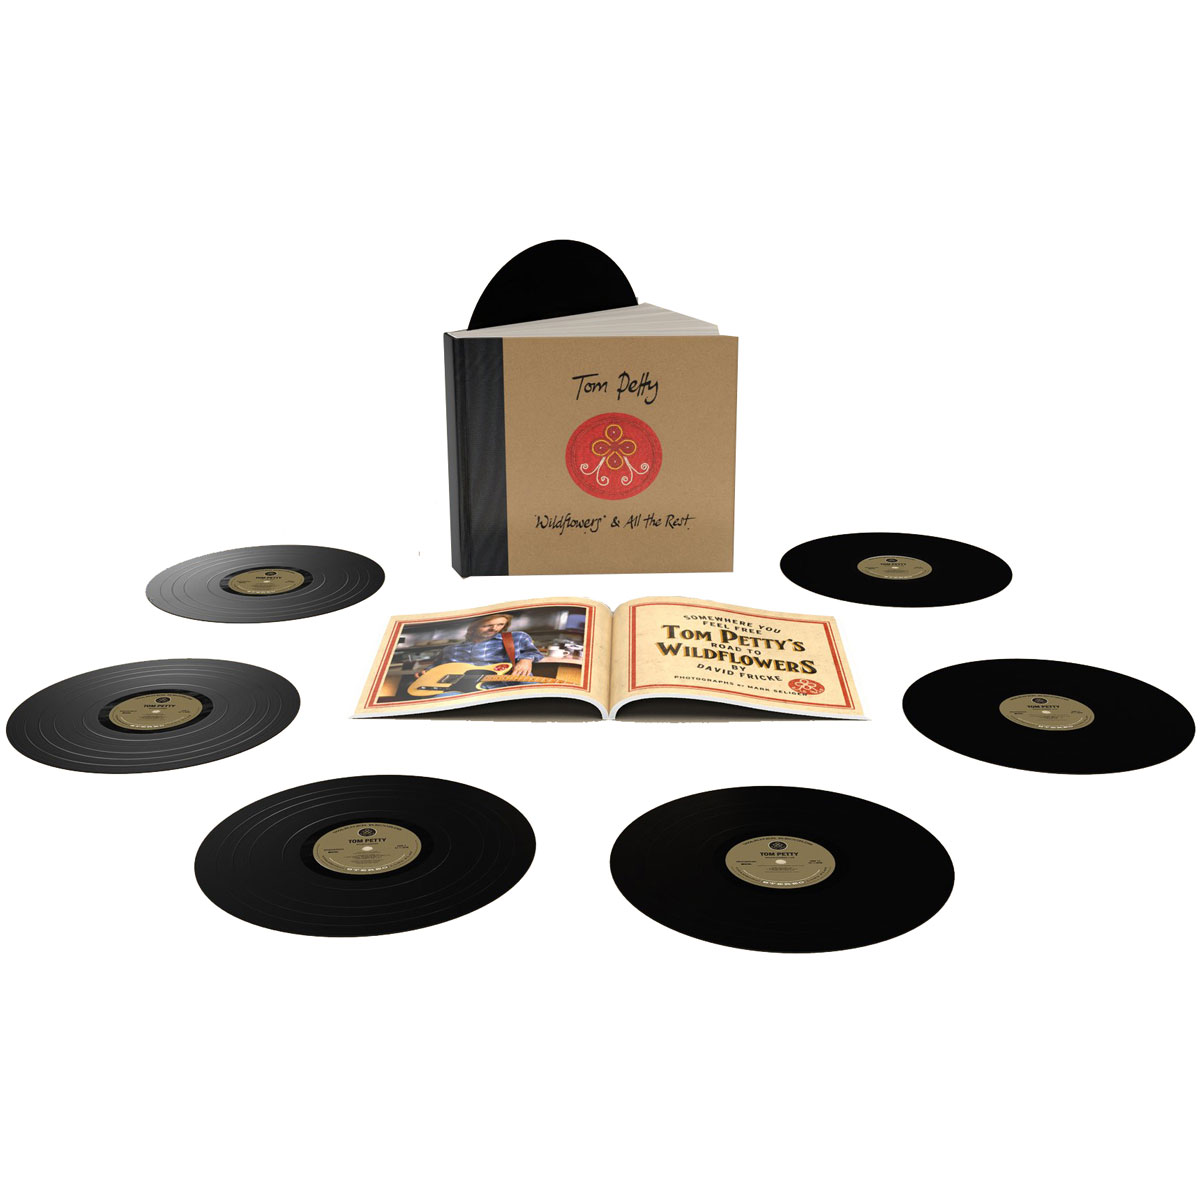 Tom Petty - Wildflowers & All The Rest (Deluxe Edition) - 7 x LP